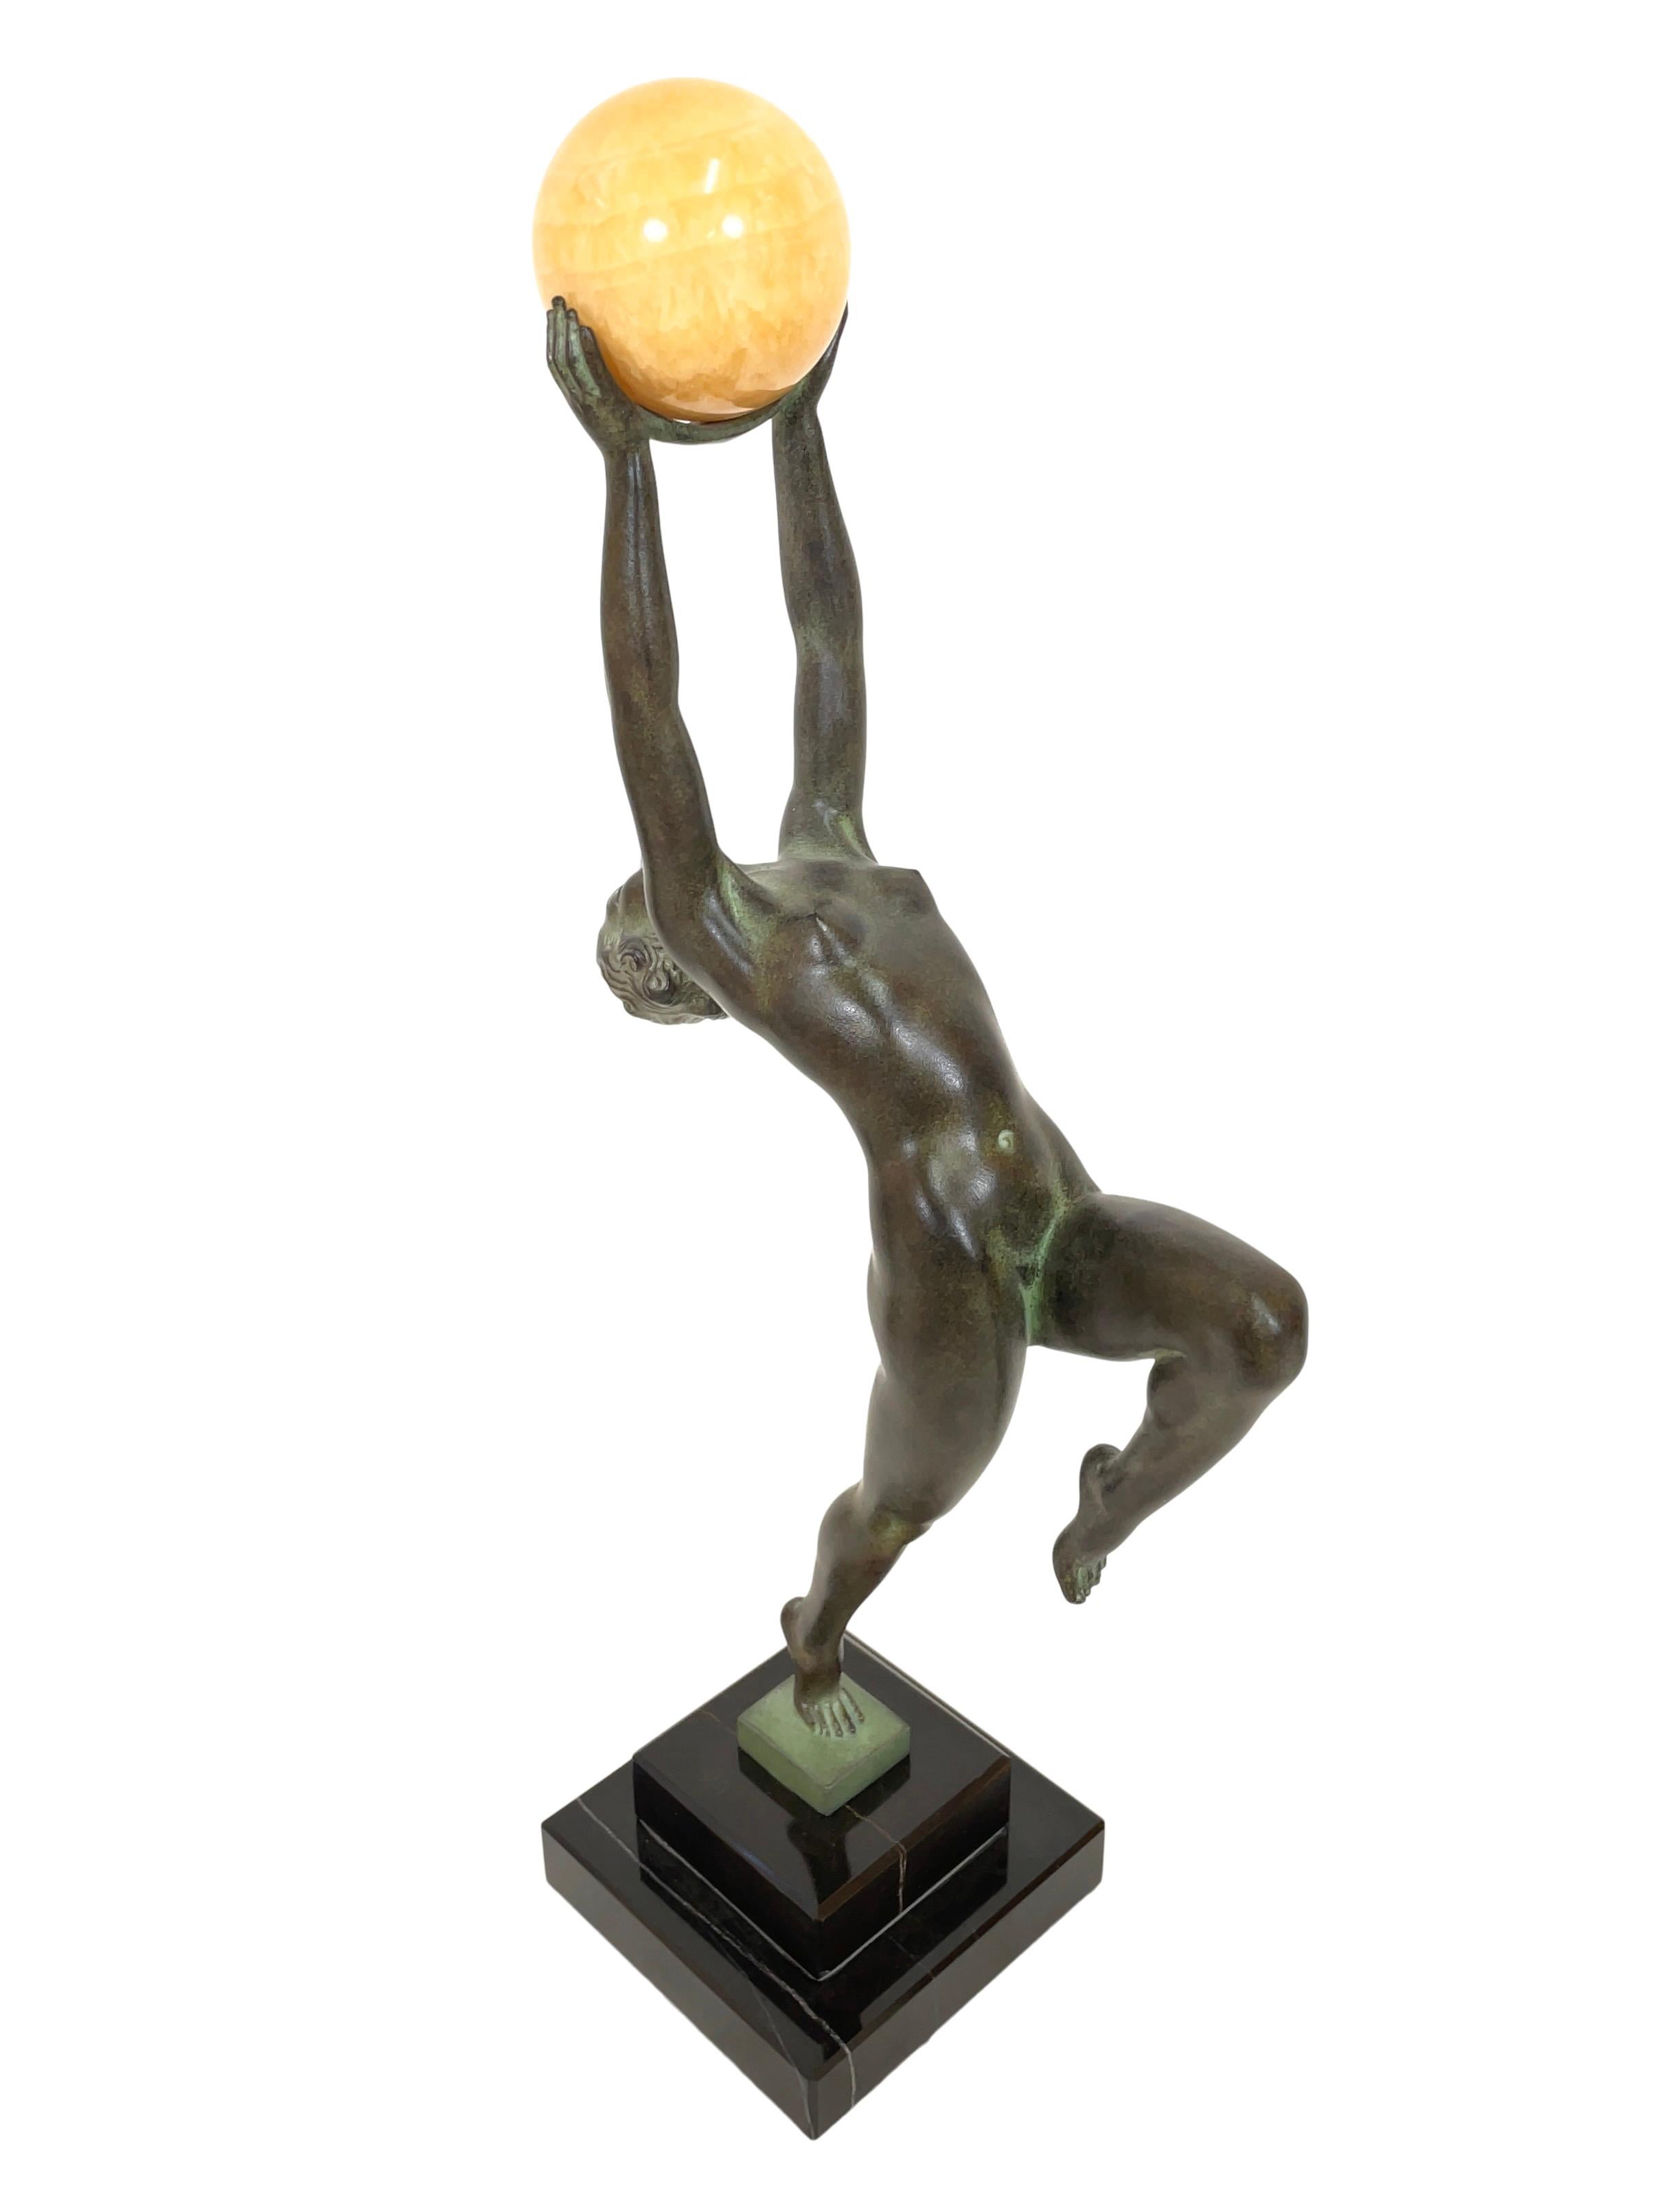 Contemporary Dancer Sculpture Jeu with a Jade Ball from Max Le Verrier in Art Deco Style